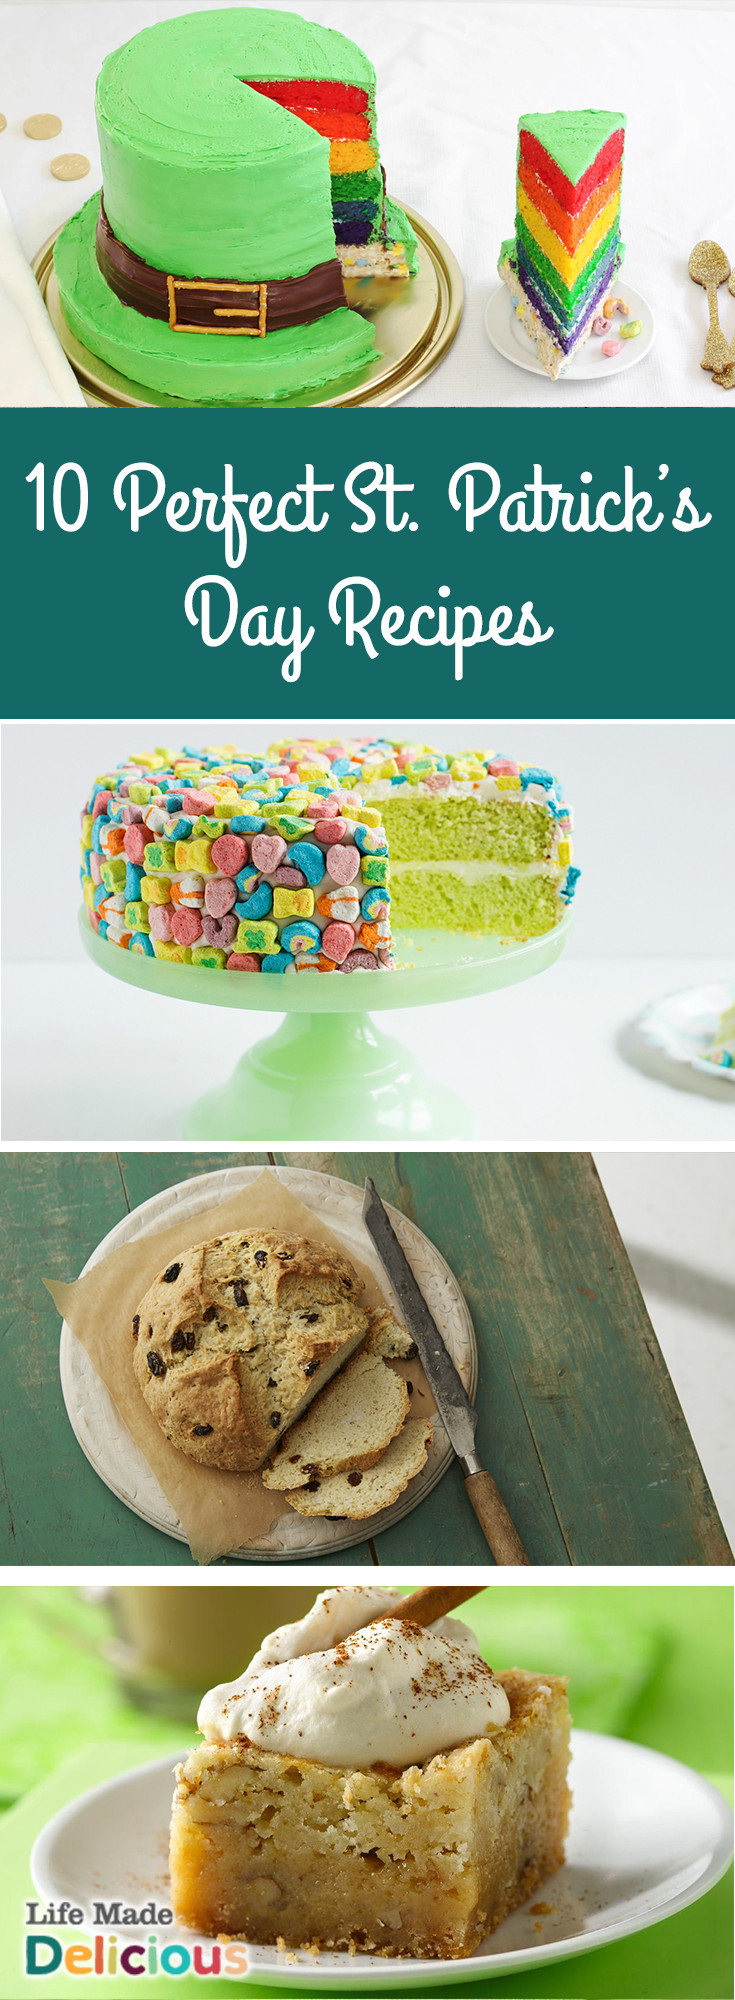 Traditional St Patrick'S Day Desserts
 10 Perfect St Patrick s Day Recipes